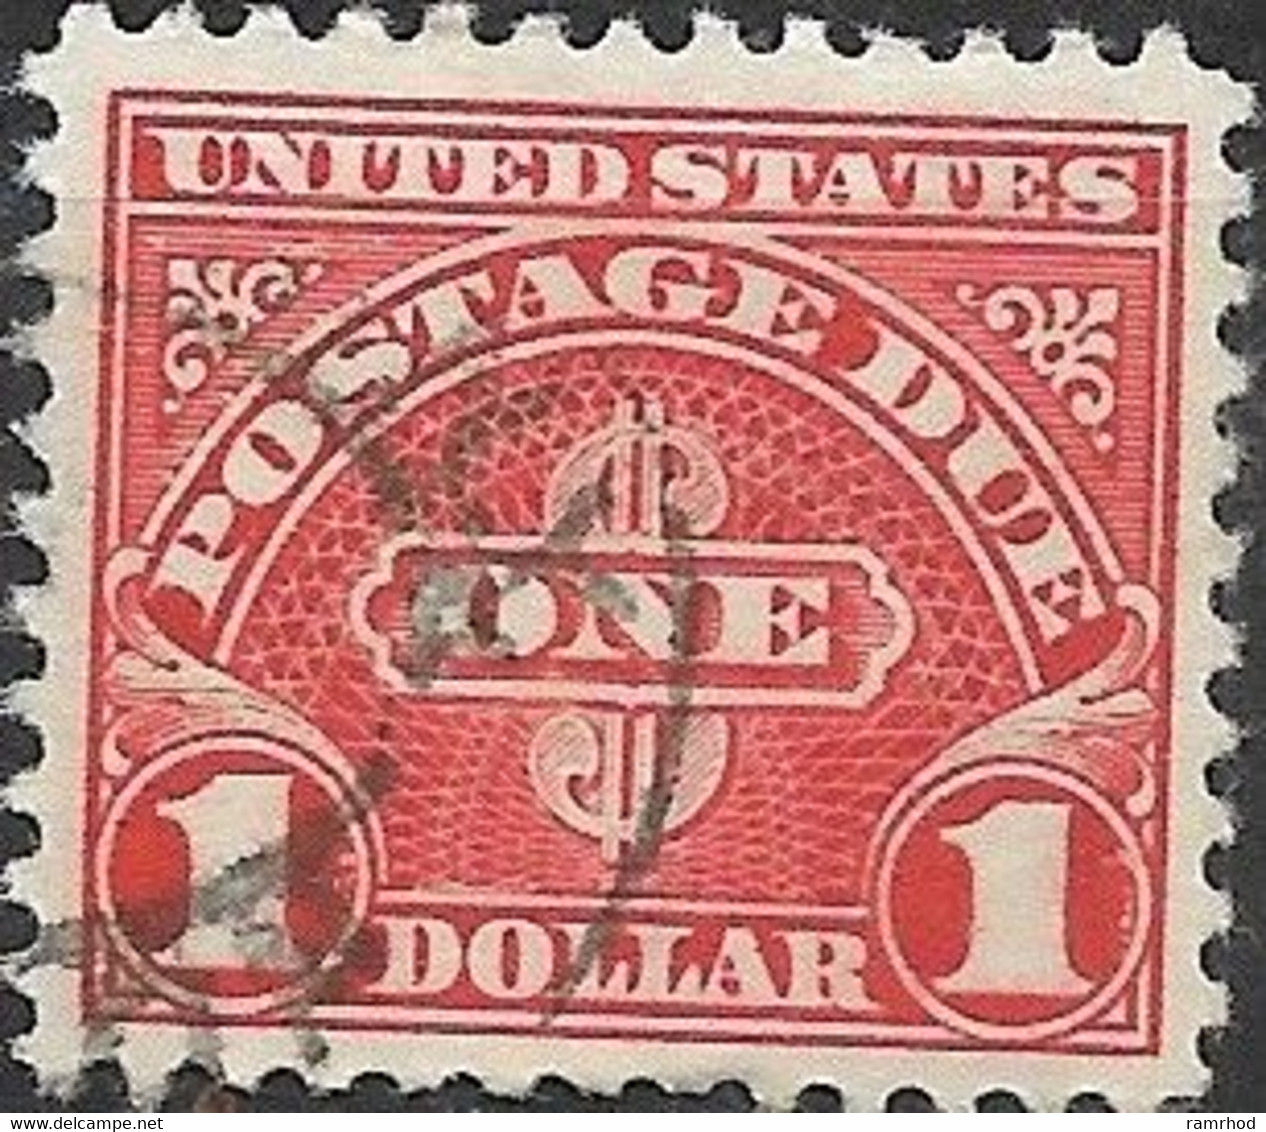 USA 1930 Postage Due - $1 - Red FU - Franqueo